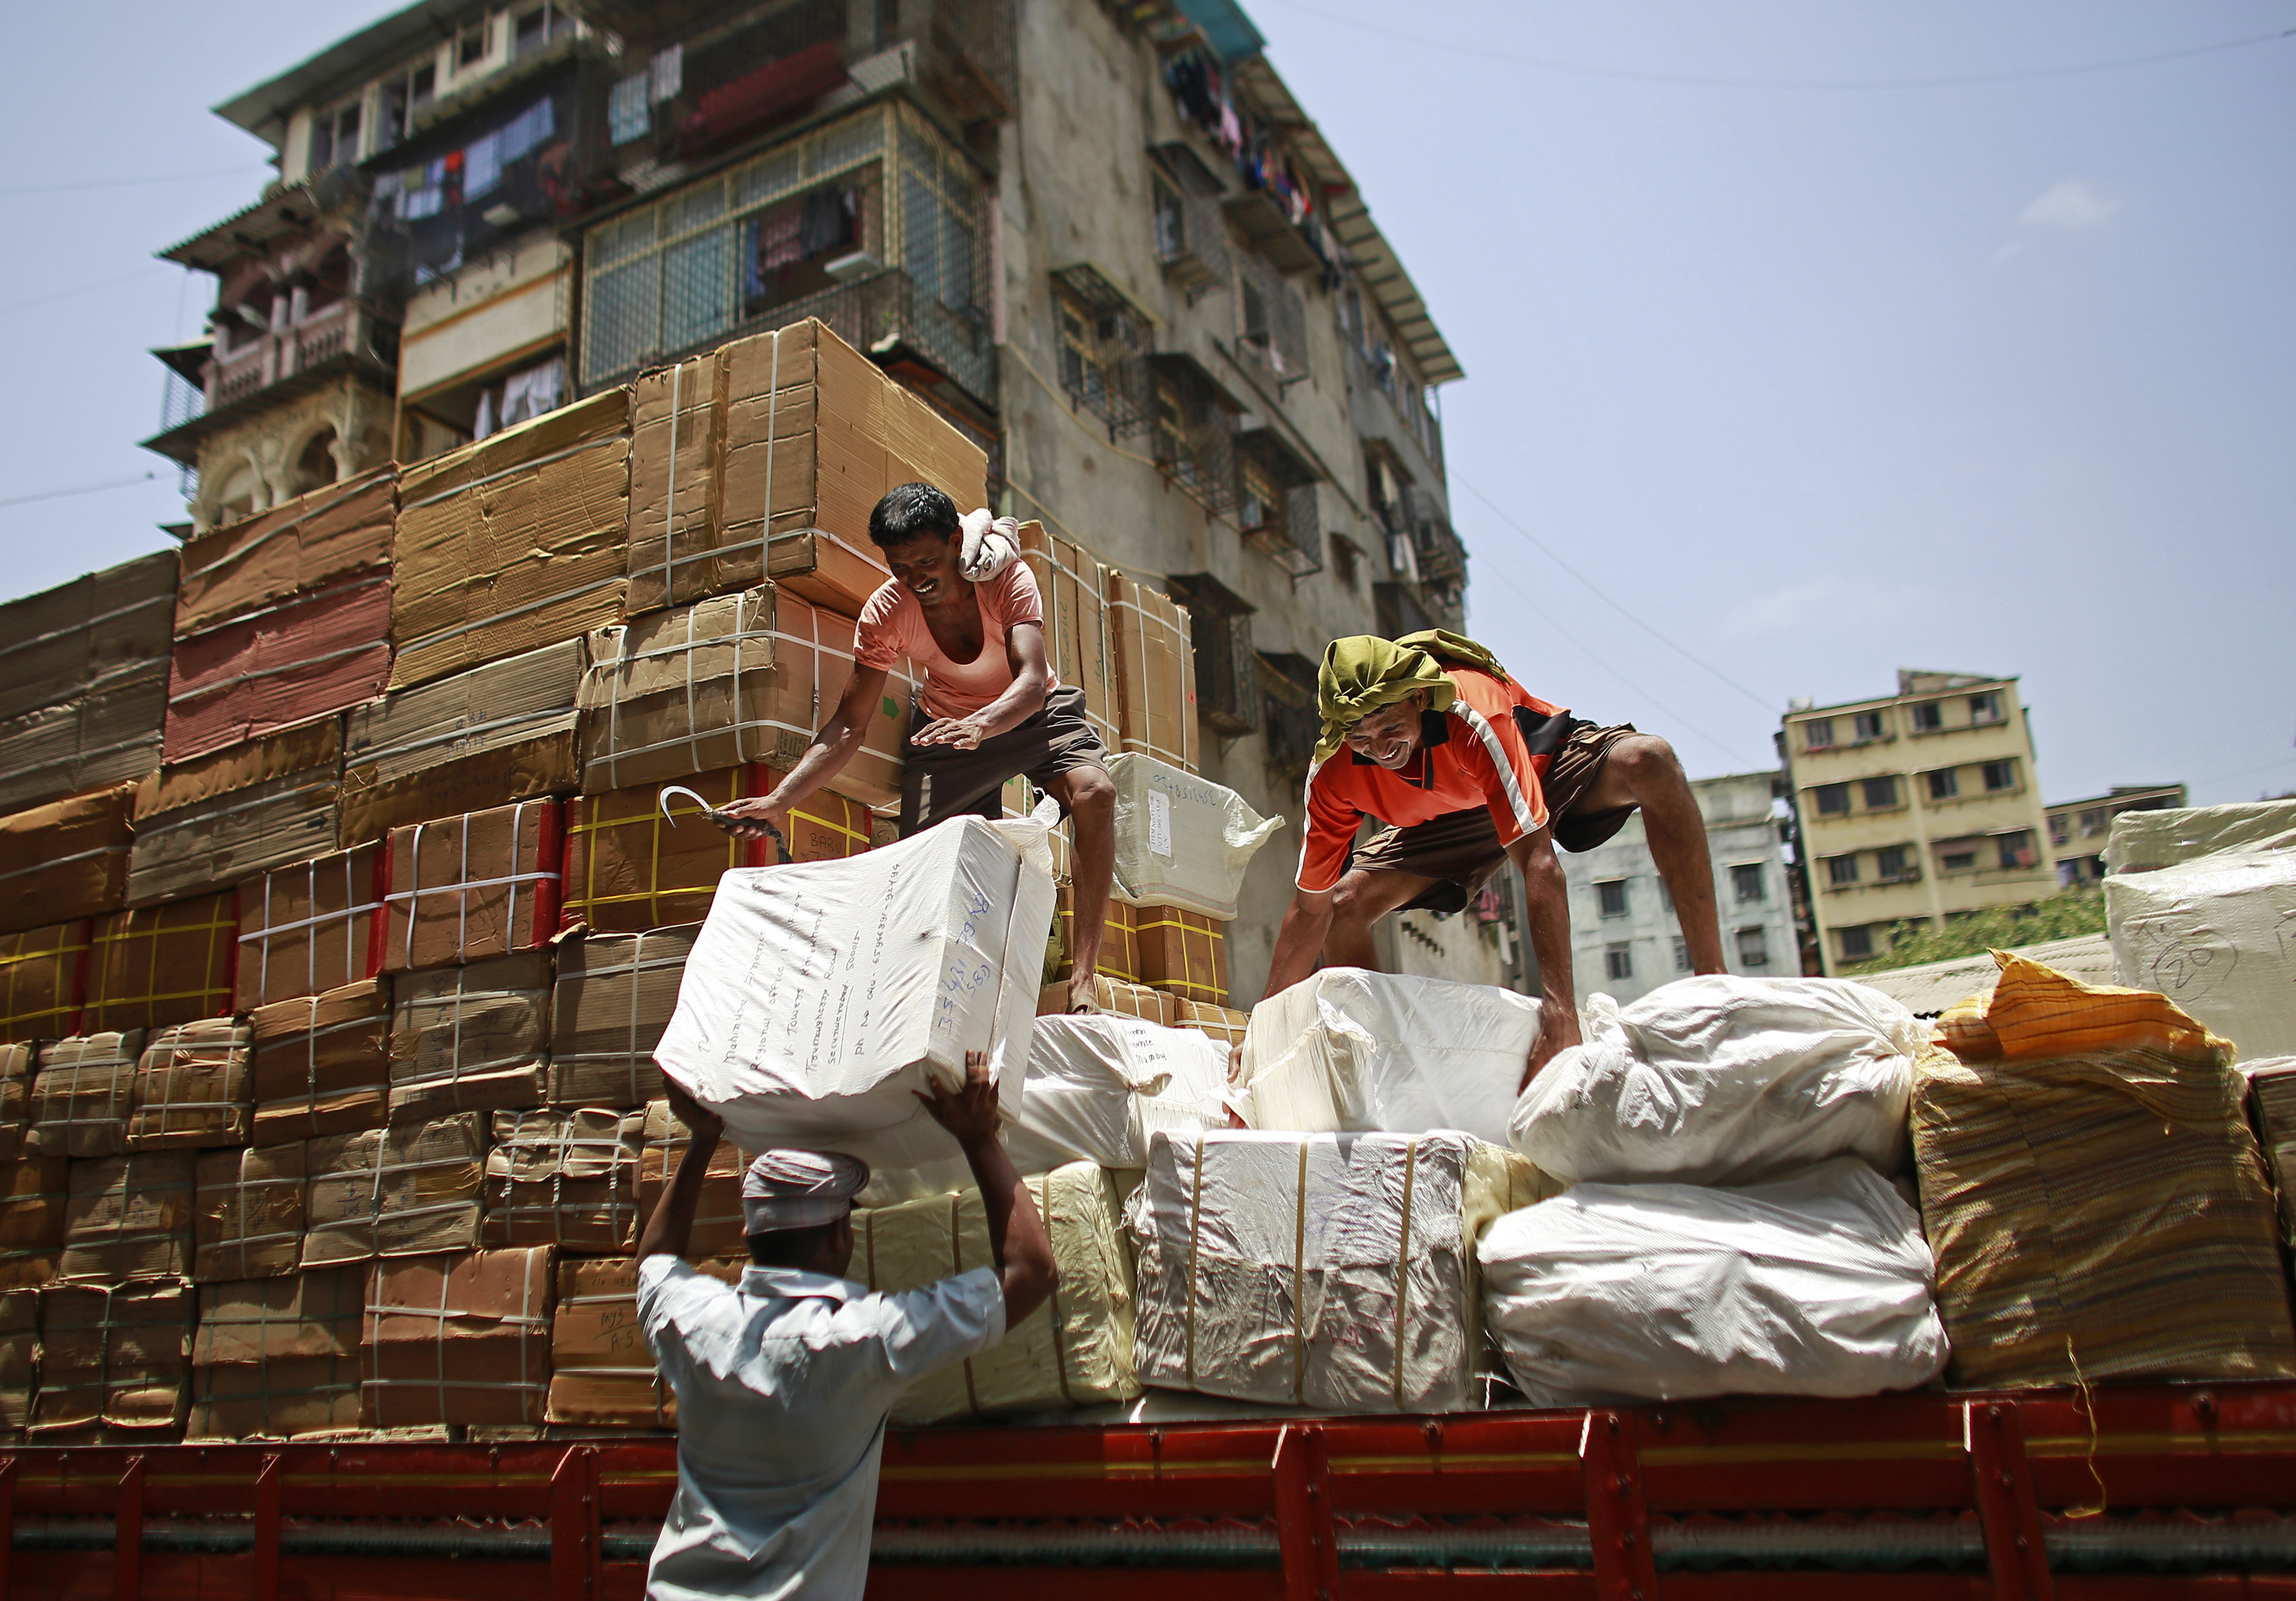 Workers of a transport company load packages on a truck at a wholesale market in Mumbai